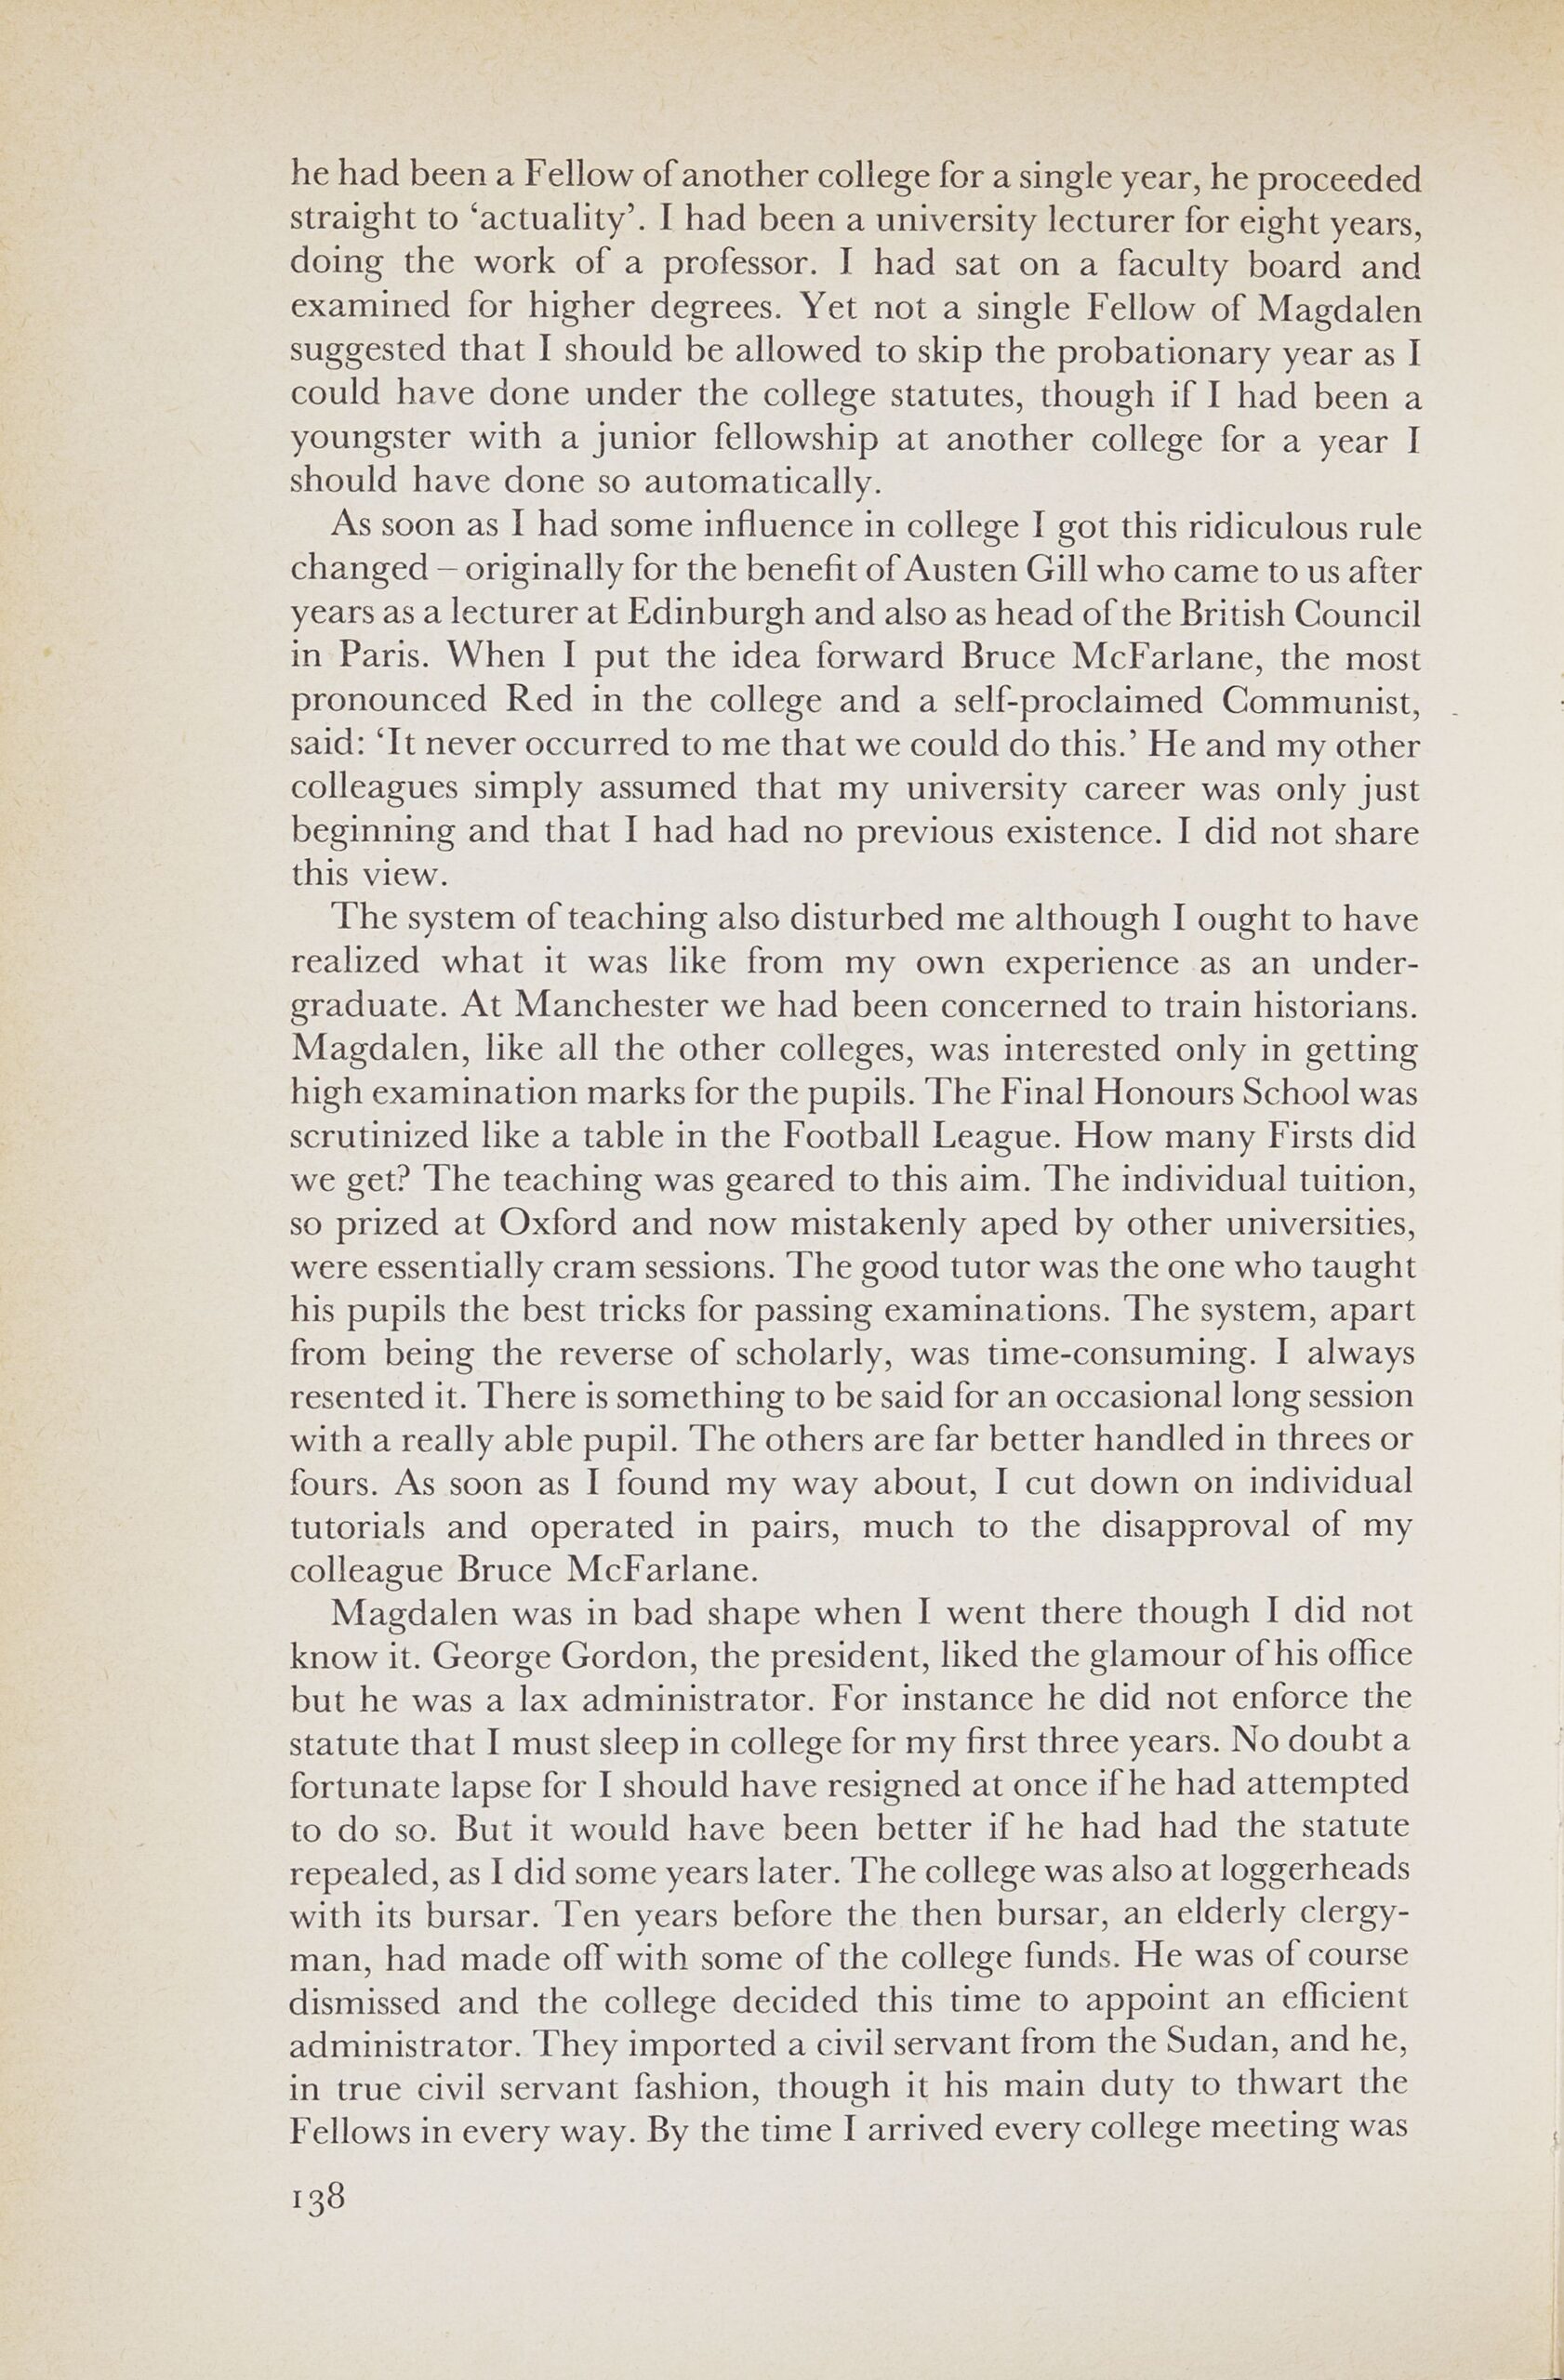 Page from a book, text reads: he had been a Fellow of another college for a single year, he proceeded straight to `actuality'. I had been a university lecturer for eight years, doing the work of a professor. I had sat on a faculty board and examined for higher degrees. Yet not a single Fellow of Magdalen suggested that I should be allowed to skip the probationary year as I could have done under the college statutes, though if I had been a youngster with a junior fellowship at another college for a year I should have done so automatically. As soon as I had some influence in college I got this ridiculous rule changed — originally for the benefit of Austen Gill who came to us after years as a lecturer at Edinburgh and also as head of the British Council in Paris. When I put the idea forward Bruce McFarlane, the most pronounced Red in the college and a self-proclaimed Communist, said: `It never occurred to me that we could do this.' He and my other colleagues simply assumed that my university career was only just beginning and that I had had no previous existence. I did not share this view. The system of teaching also disturbed me although I ought to have realized what it was like from my own experience -as an undergraduate. At Manchester we had been concerned to train historians. Magdalen, like all the other colleges, was interested only in getting high examination marks for the pupils. The Final Honours School was scrutinized like a table in the Football League. How many Firsts did we get? The teaching was geared to this aim. The individual tuition, so prized at Oxford and now mistakenly aped by other universities, were essentially cram sessions. The good tutor was the one who taught his pupils the best tricks for passing examinations. The system, apart from being the reverse of scholarly, was time-consuming. I always resented it. There is something to be said for an occasional long session with a really able pupil. The others are far better handled in threes or fours. As soon as I found my way about, I cut down on individual tutorials and operated in pairs, much to the disapproval of my colleague Bruce McFarlane. Magdalen was in bad shape when I went there though I did not know it. George Gordon, the president, liked the glamour of his office but he was a lax administrator. For instance he did not enforce the statute that I must sleep in college for my first three years. No doubt a fortunate lapse for I should have resigned at once if he had attempted to do so. But it would have been better if he had had the statute repealed, as I did some years later. The college was also at loggerheads with its bursar. Ten years before the then bursar, an elderly clergyman, had made off with some of the college funds. He was of course dismissed and the college decided this time to appoint an efficient administrator. They imported a civil servant from the Sudan, and he, in true civil servant fashion, though it his main duty to thwart the Fellows in every way. By the time I arrived every college meeting was 138